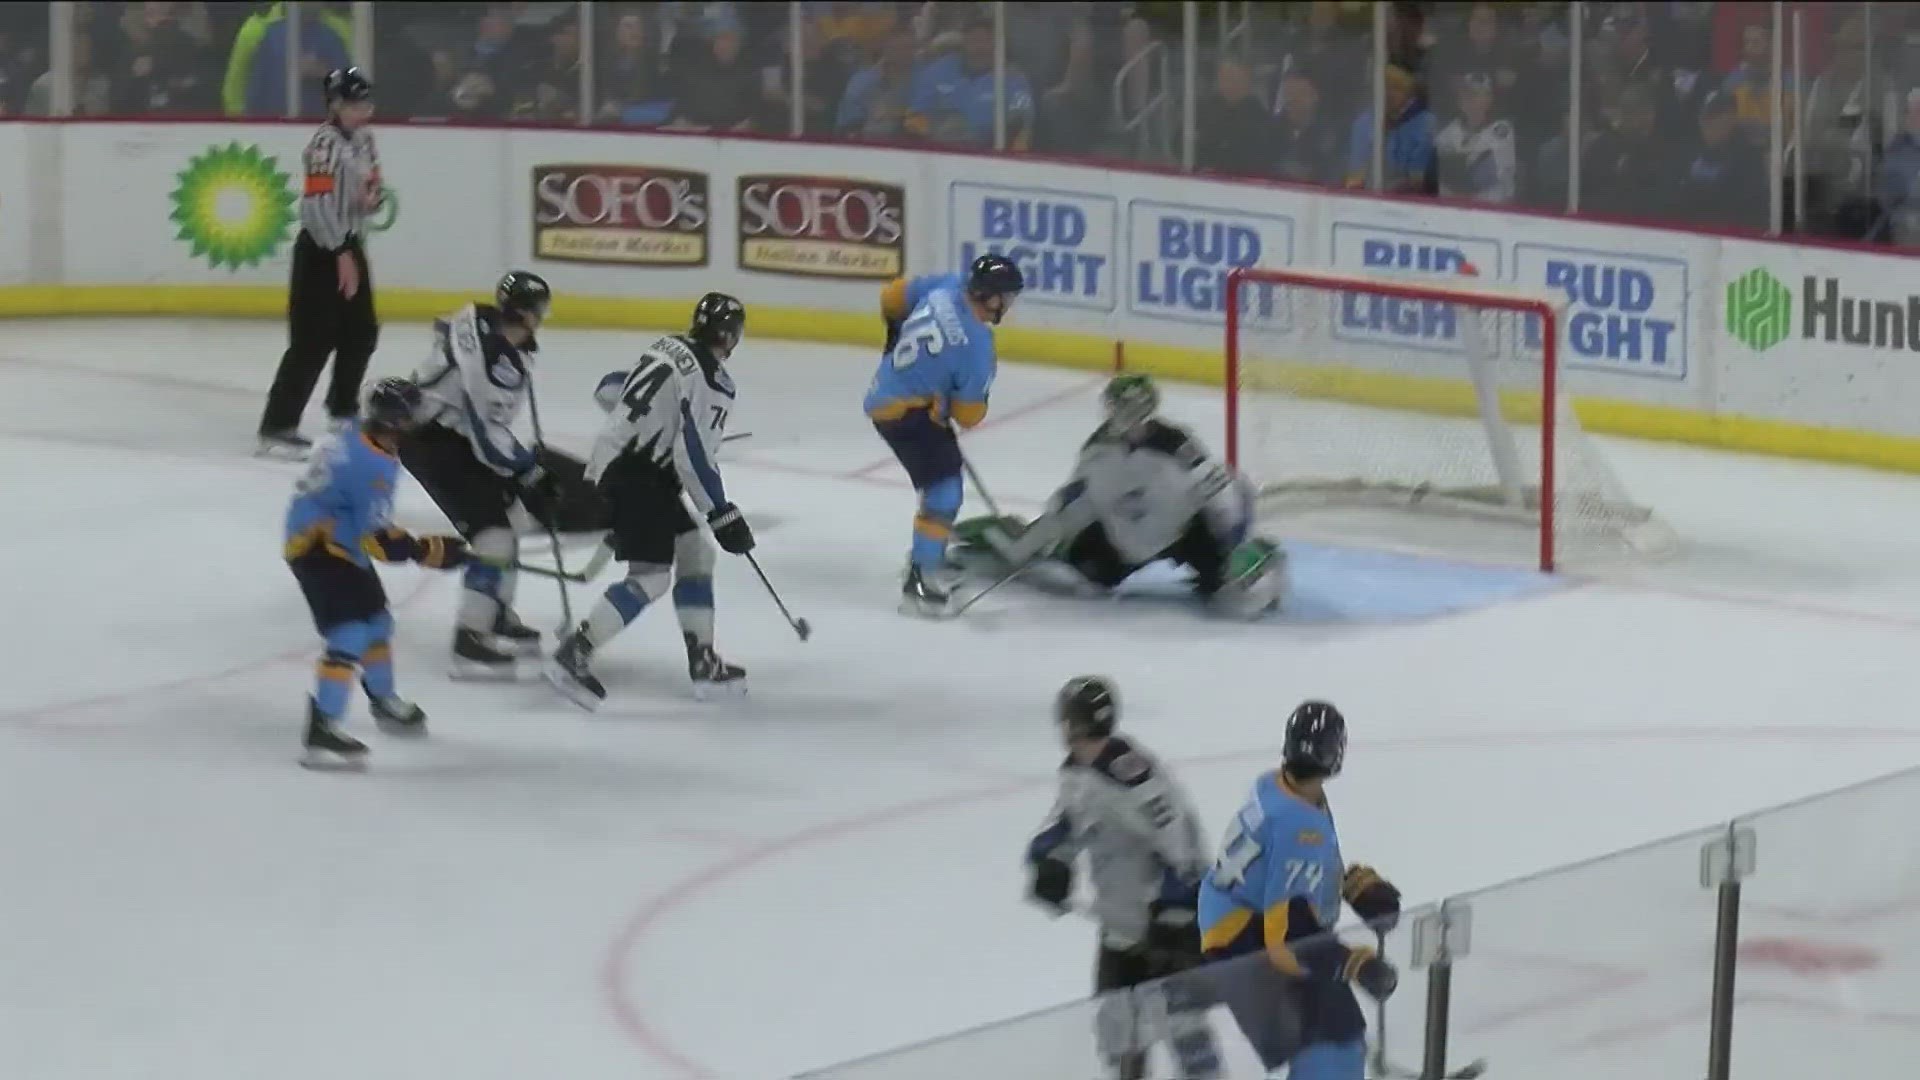 The Toledo Walleye were down 4-1 in the second period of game 3 before clawing their way to their first win of the series.